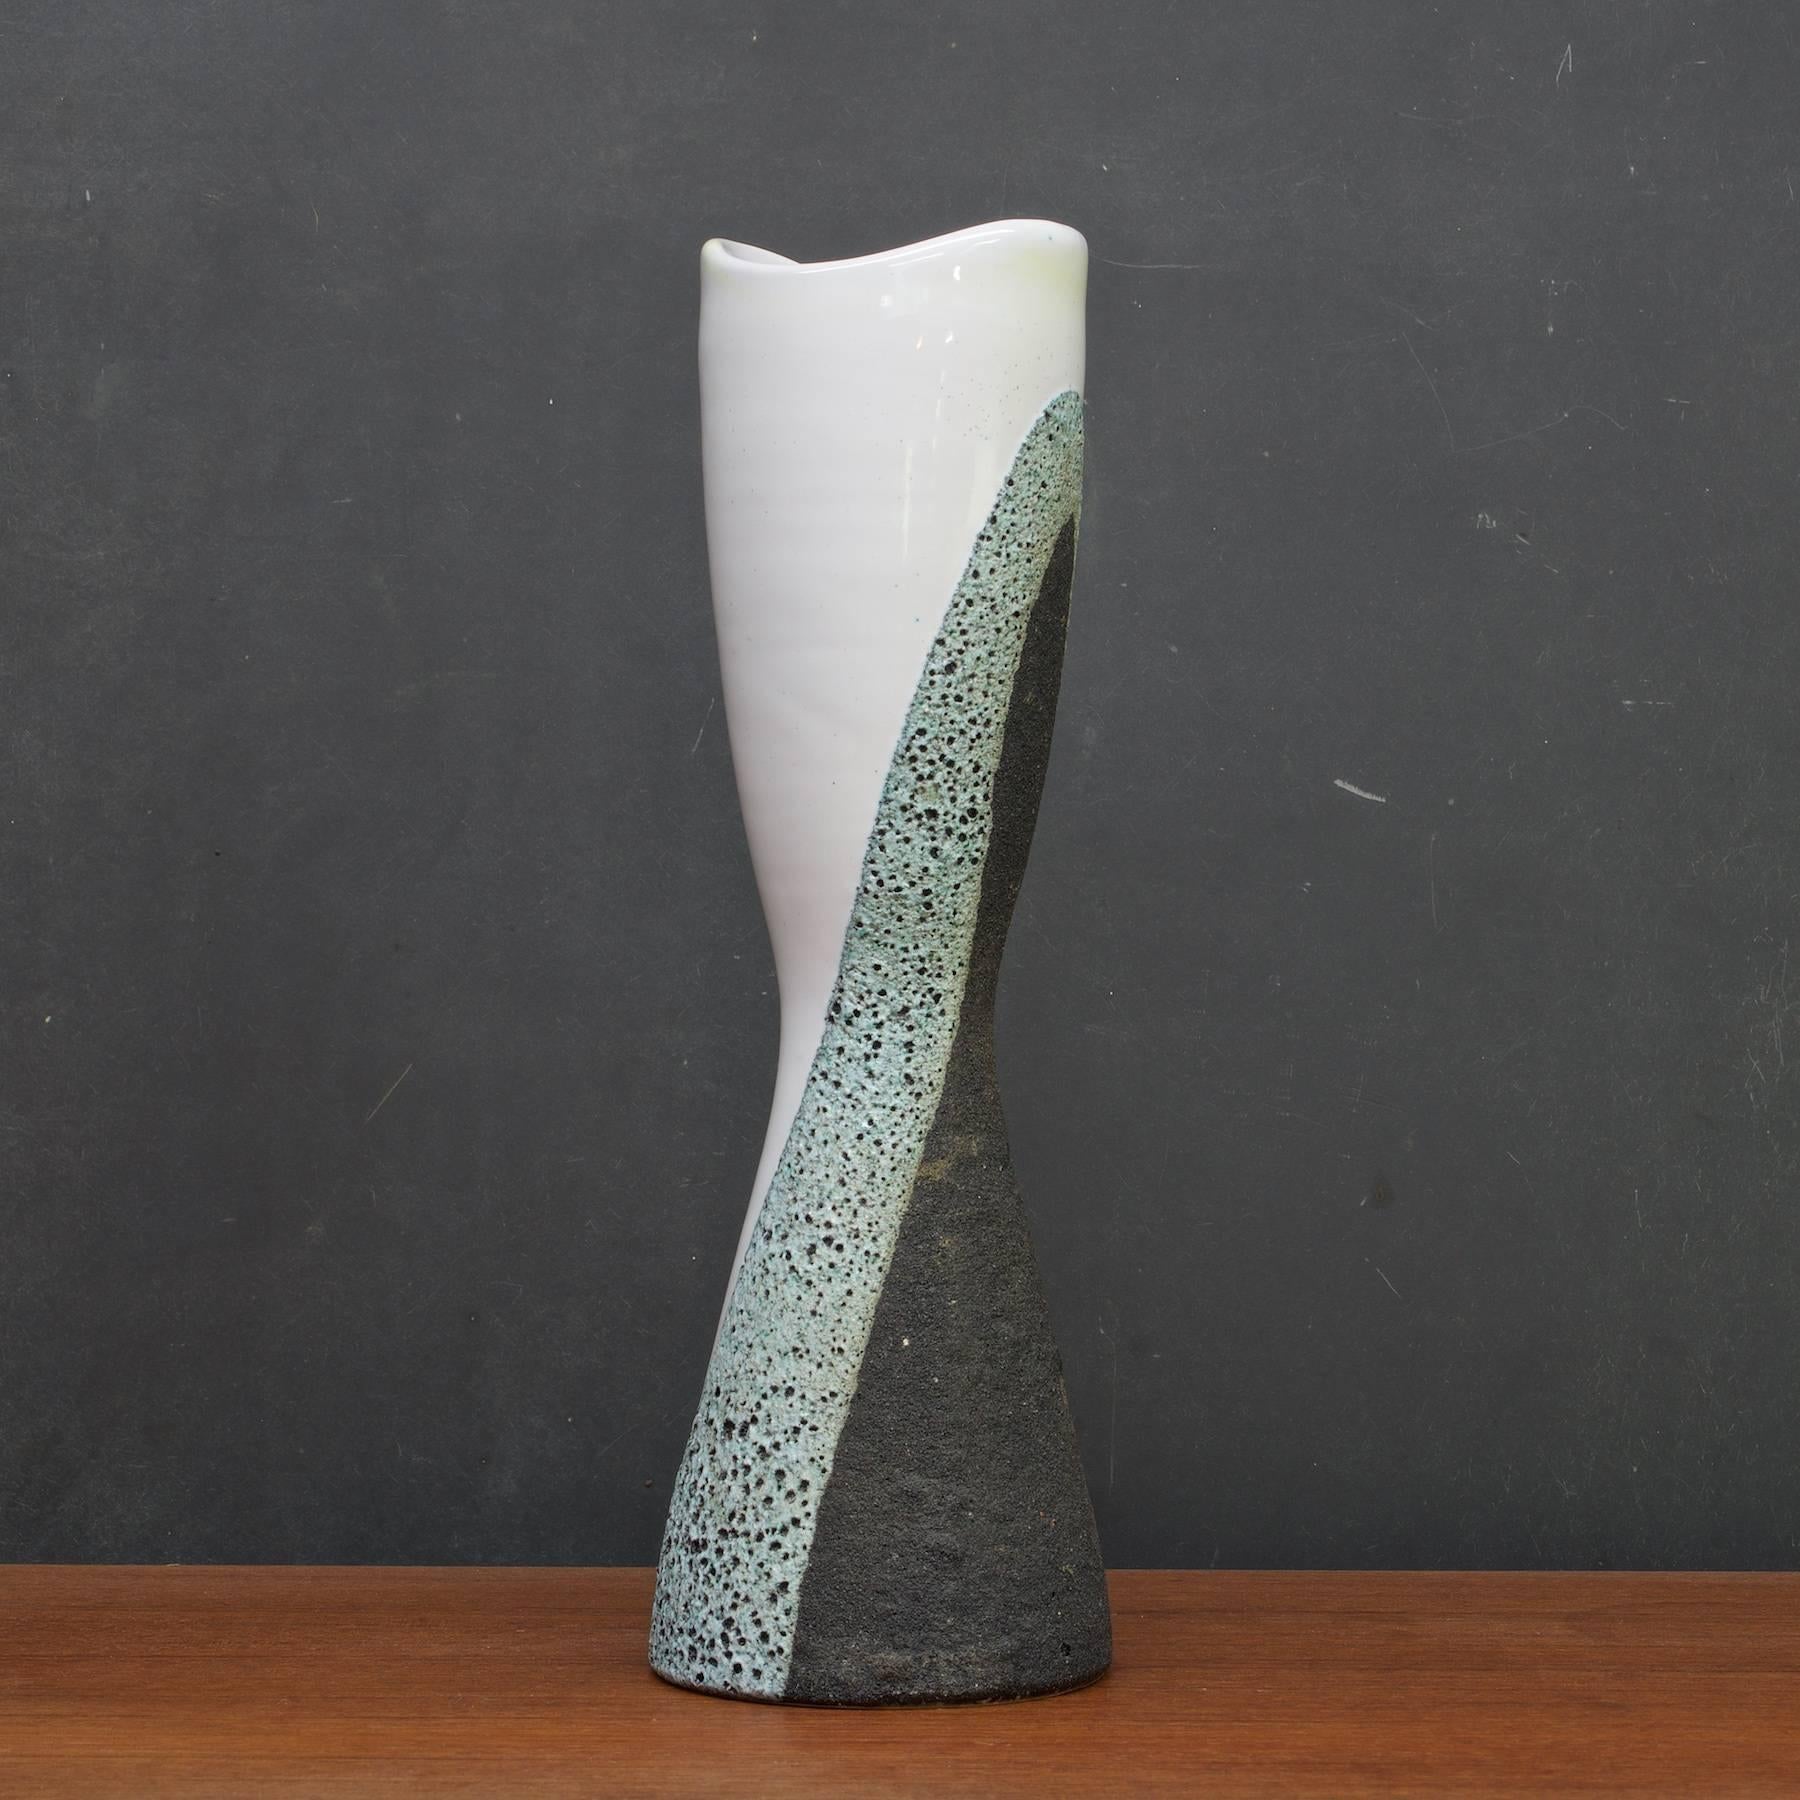 Spectacular form and layered glazes, with undulating contour and top, this vase by Ettore Sottsass made in collaboration with Aldo Londi, Bitossi/Raymor. This Sottsass glaze pattern/design was used on lamps and decorative objects in the 1960s.